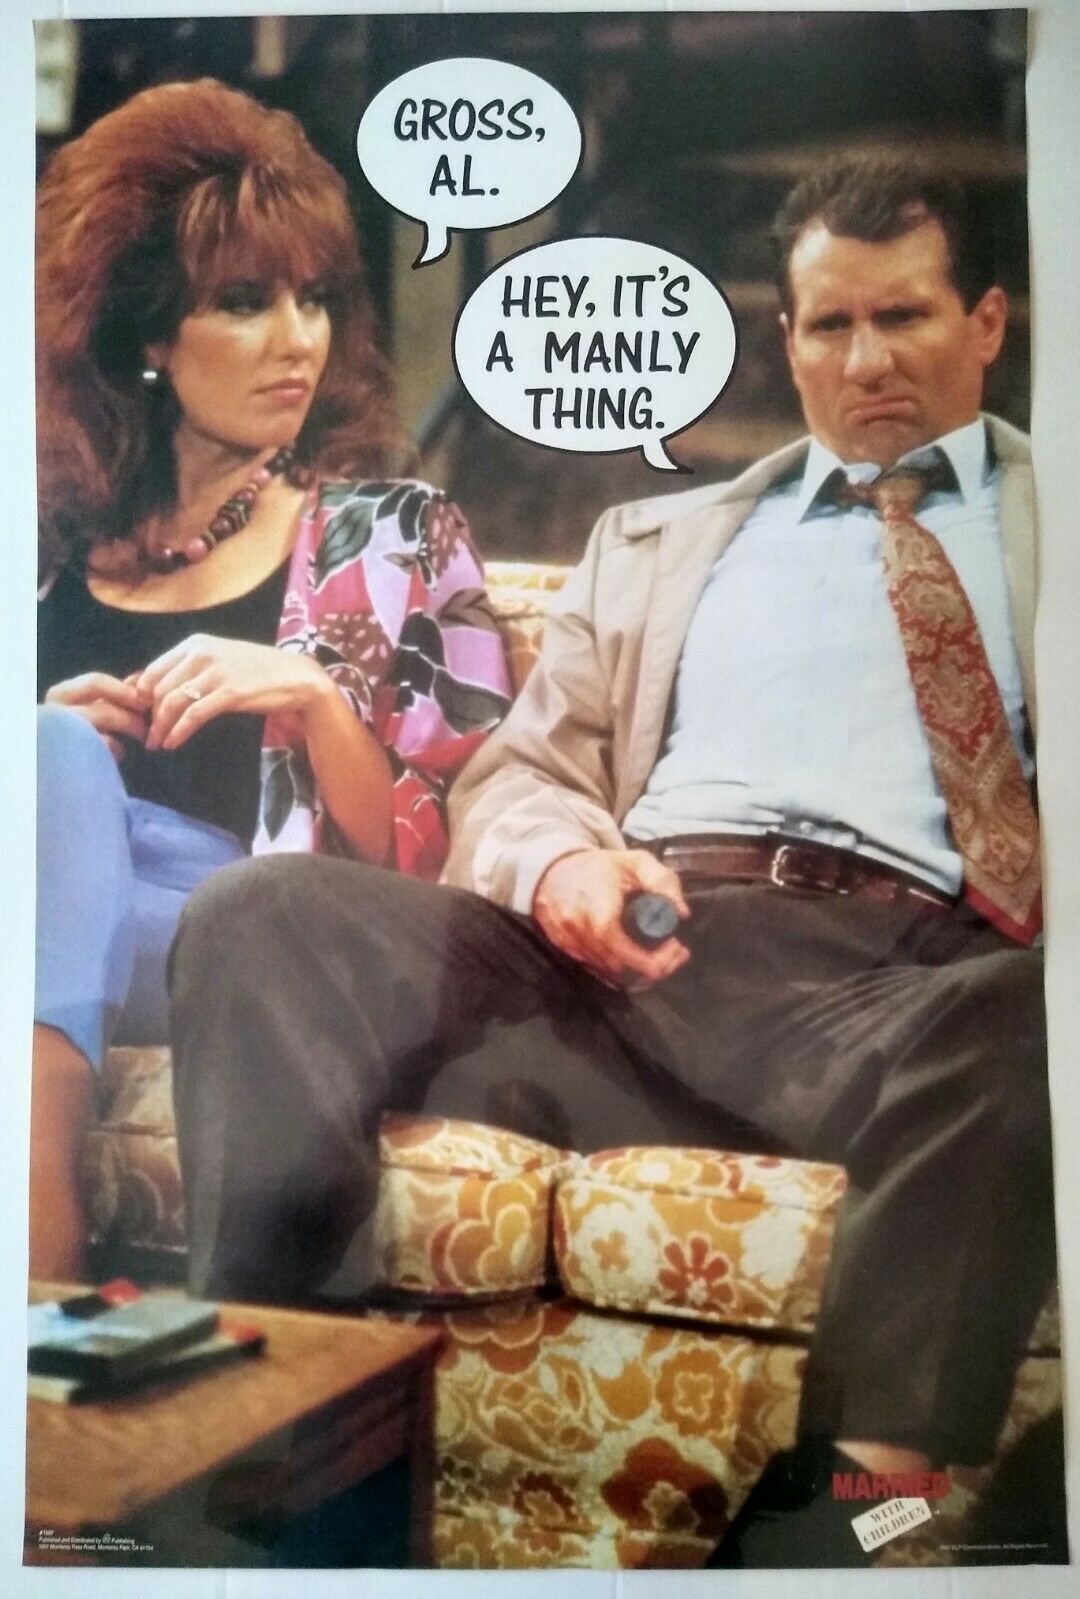 Vintage Married With Children Al Peggy Bundy Katey Sagal Ed O'neill Poster 1987